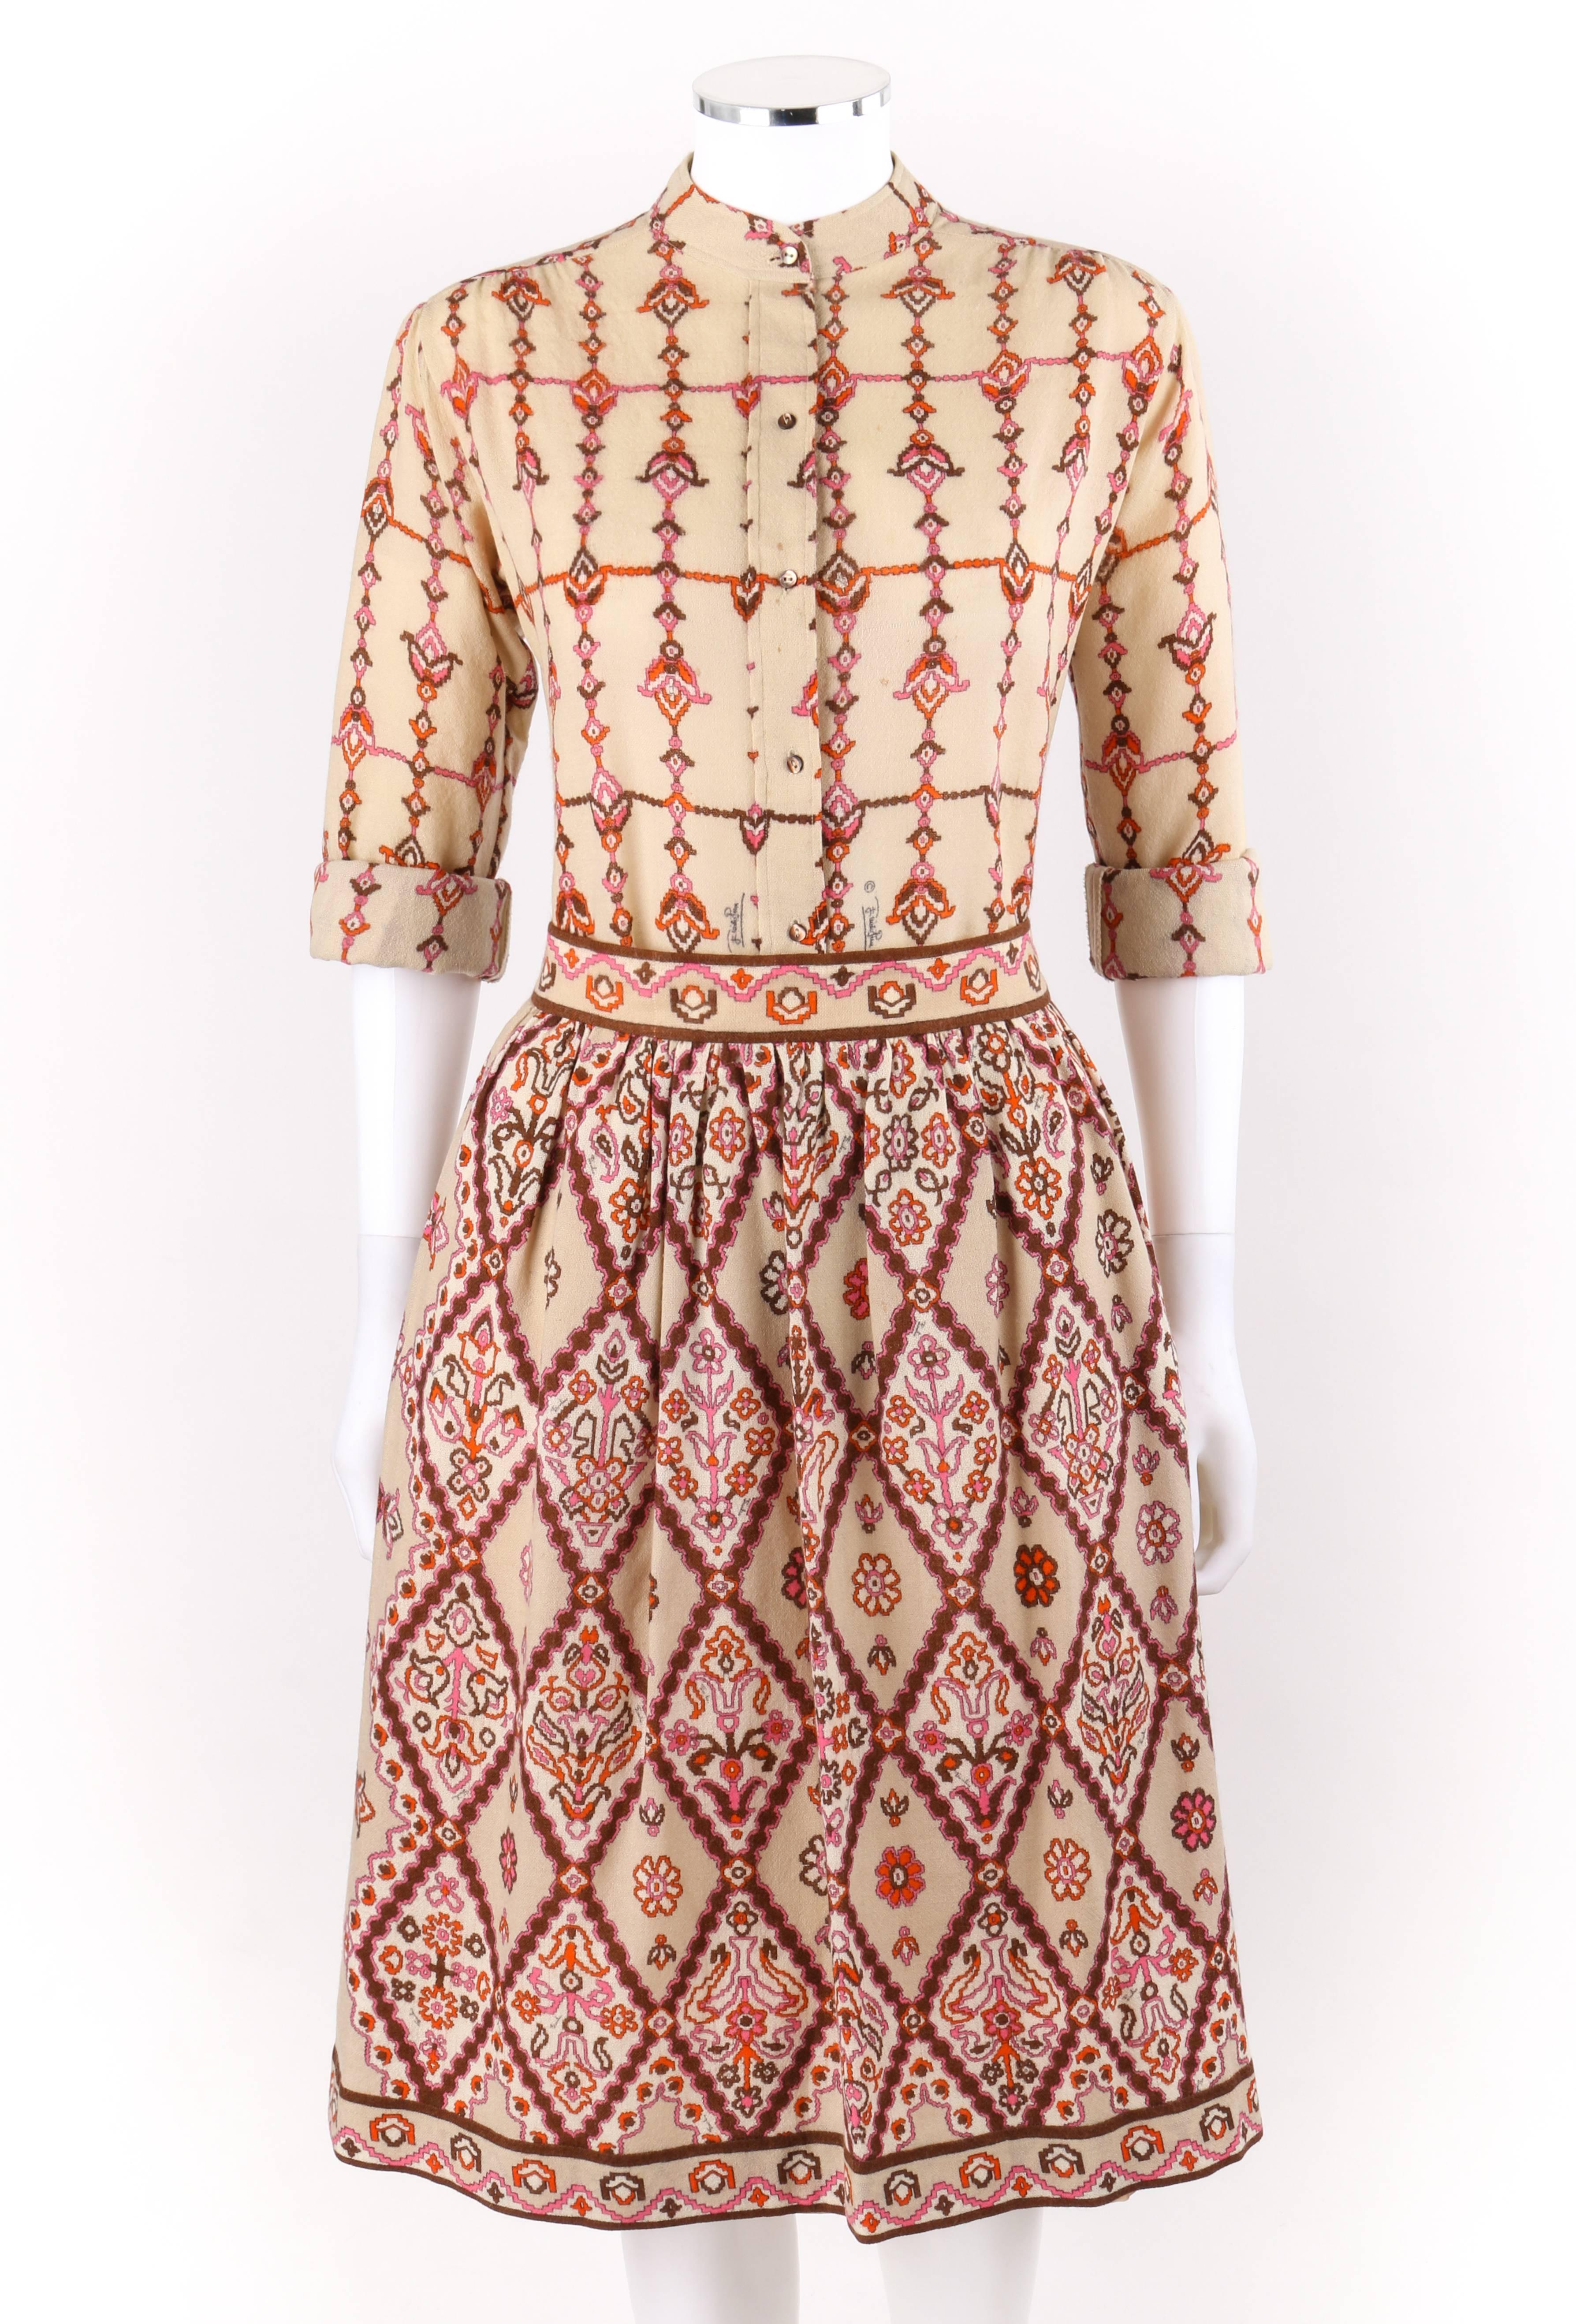 Vintage Emilio Pucci c.1950's two-piece beige floral signature print shirt gathered skirt set. Multi-color tribal floral signature print in shades of orange, pink, and brown on beige wool. Mandarin collar shirt. Six center front black mother of